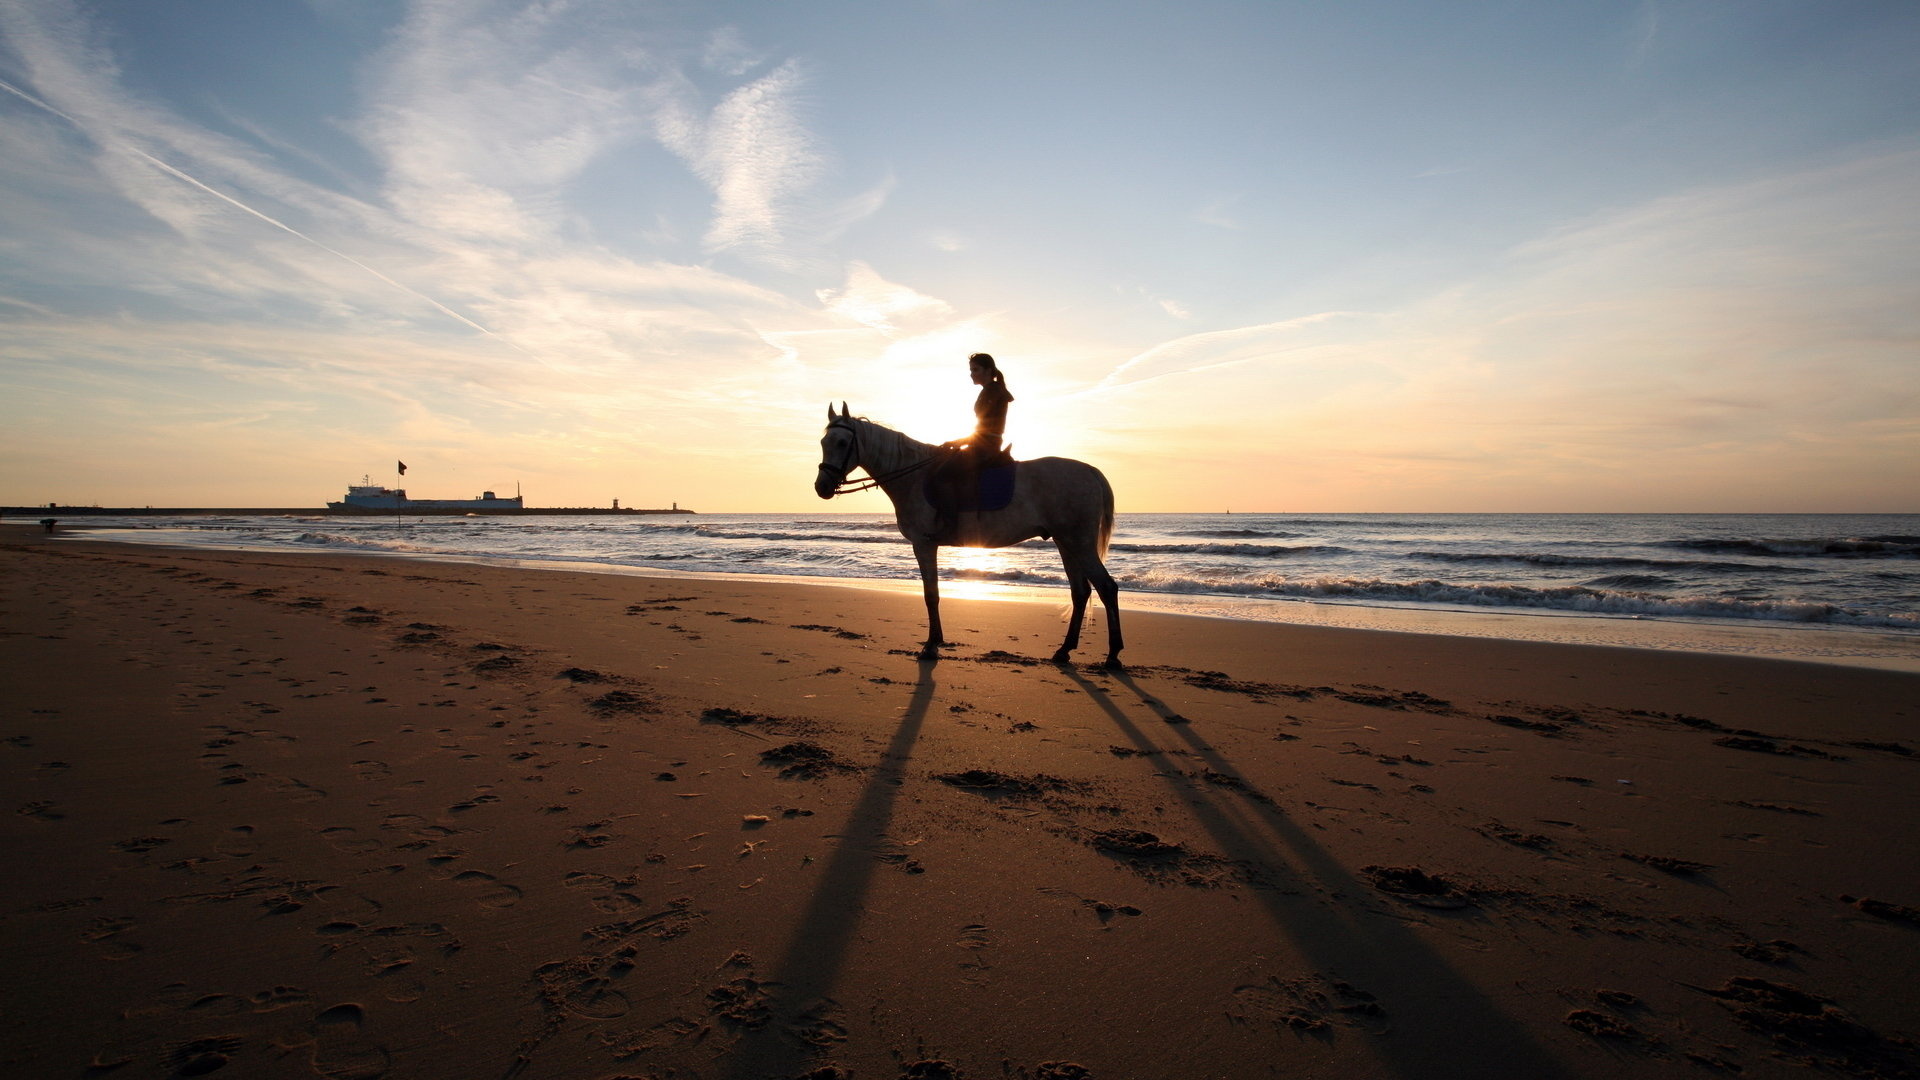 Equitation: Pleasure riding at the beach, The most popular recreational equestrian activity in the world. 1920x1080 Full HD Wallpaper.